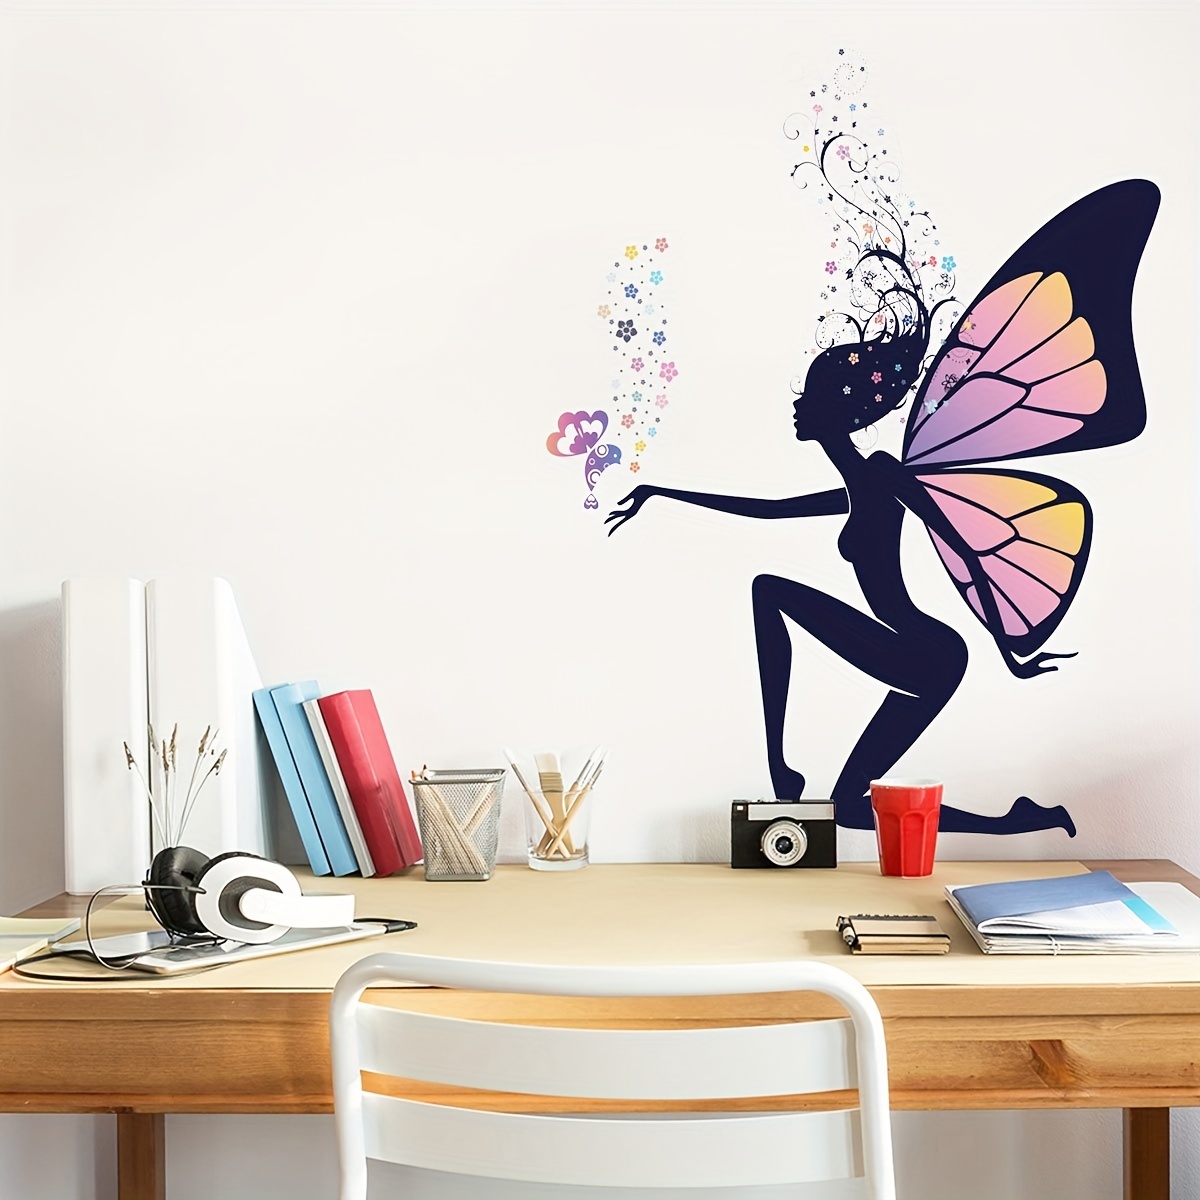 Colorful Butterfly Wall Decals